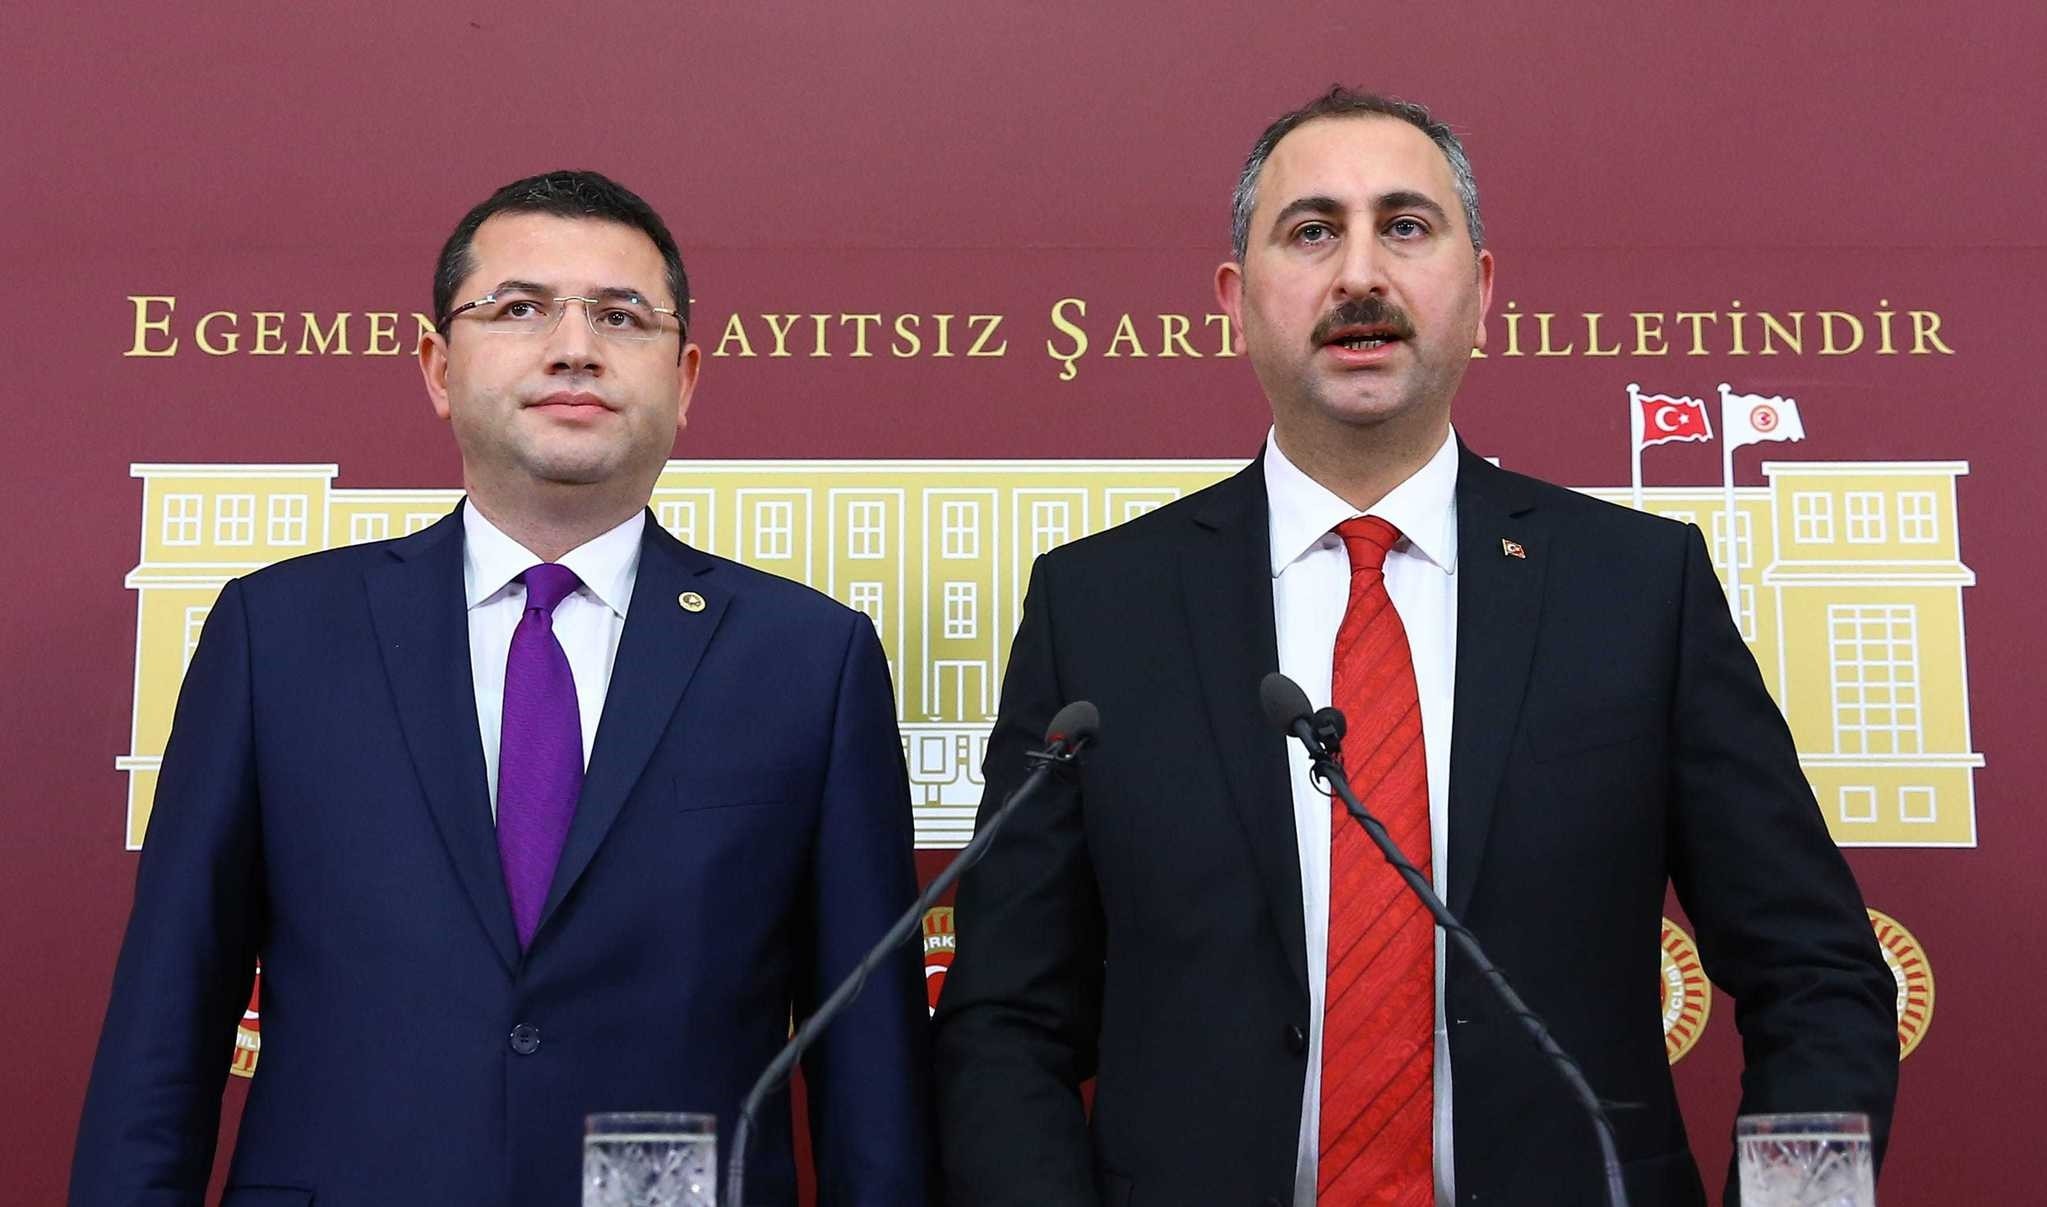 The AK Party General Secretary Abdu00fclhamit Gu00fcl and MHP Deputy Mehmet Parsak, speak at the joint press conferance in Parliament regarding the new constitutional package.